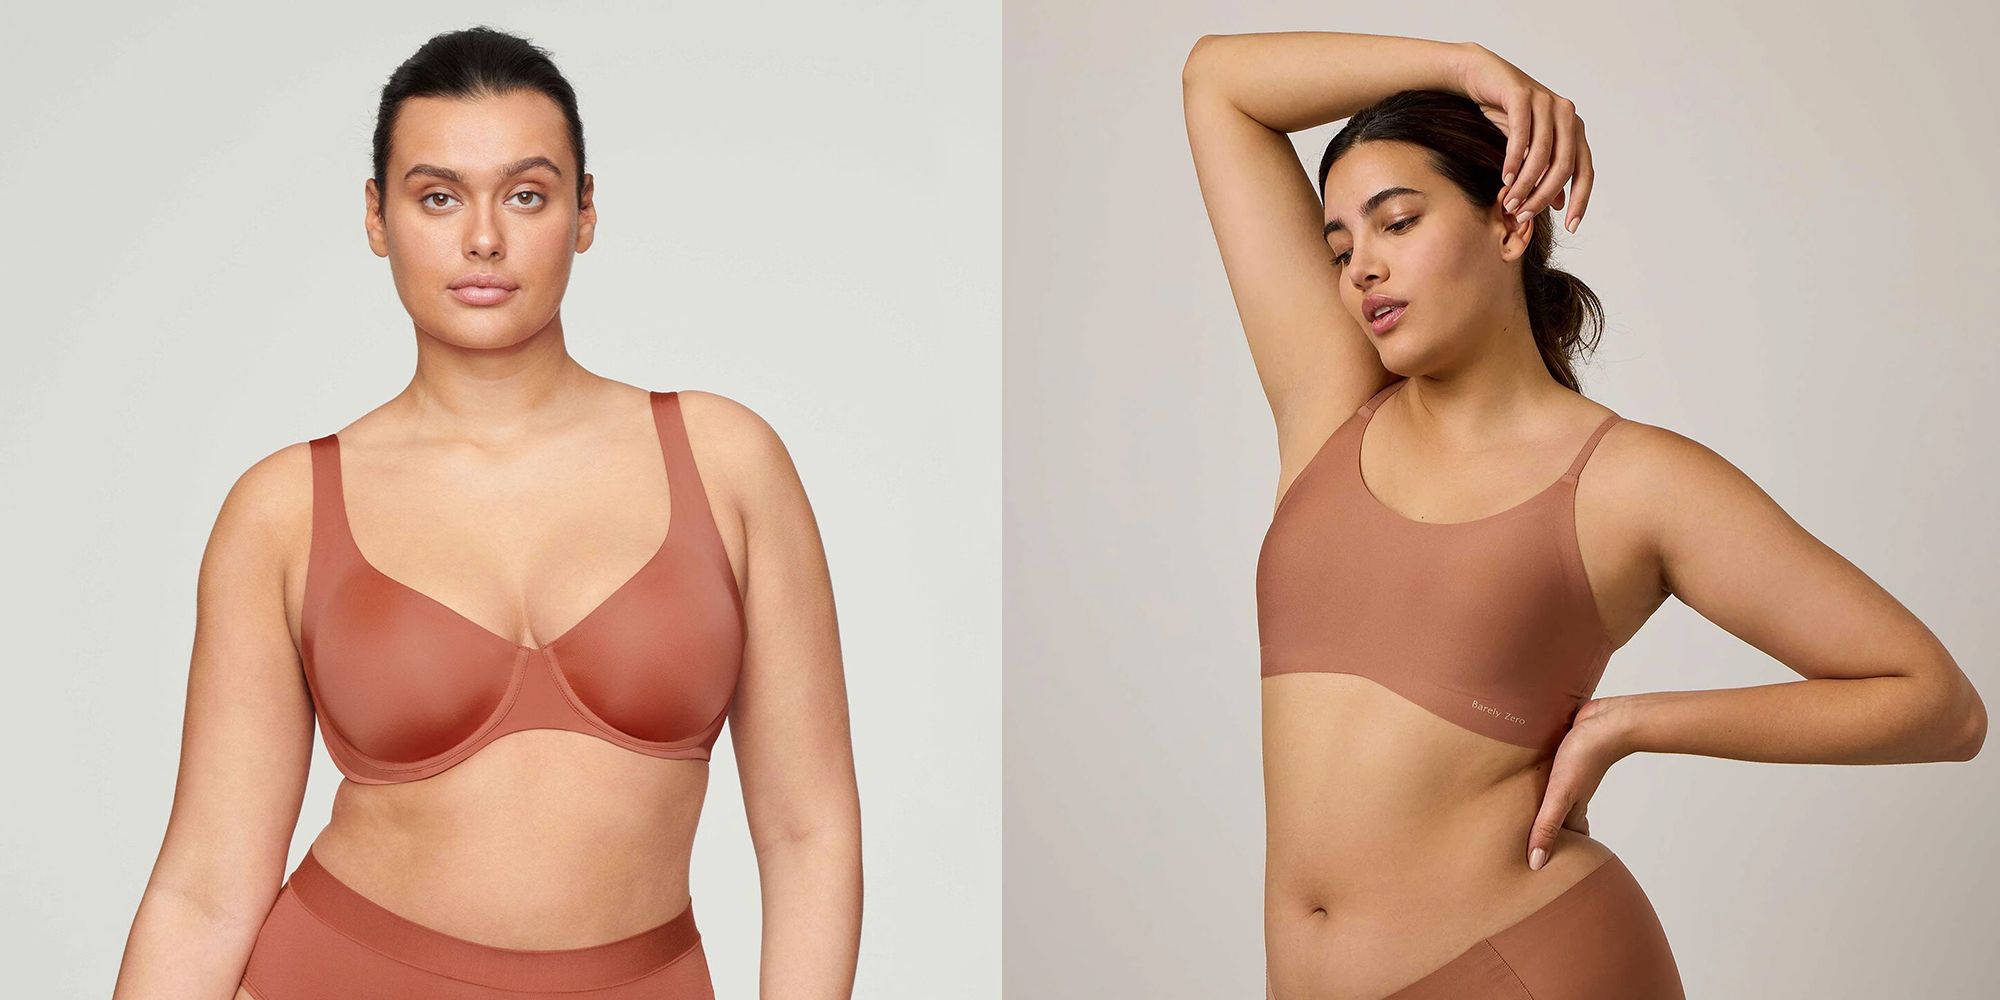 My favorite bras to hold up these 34DDD, while still being comfy